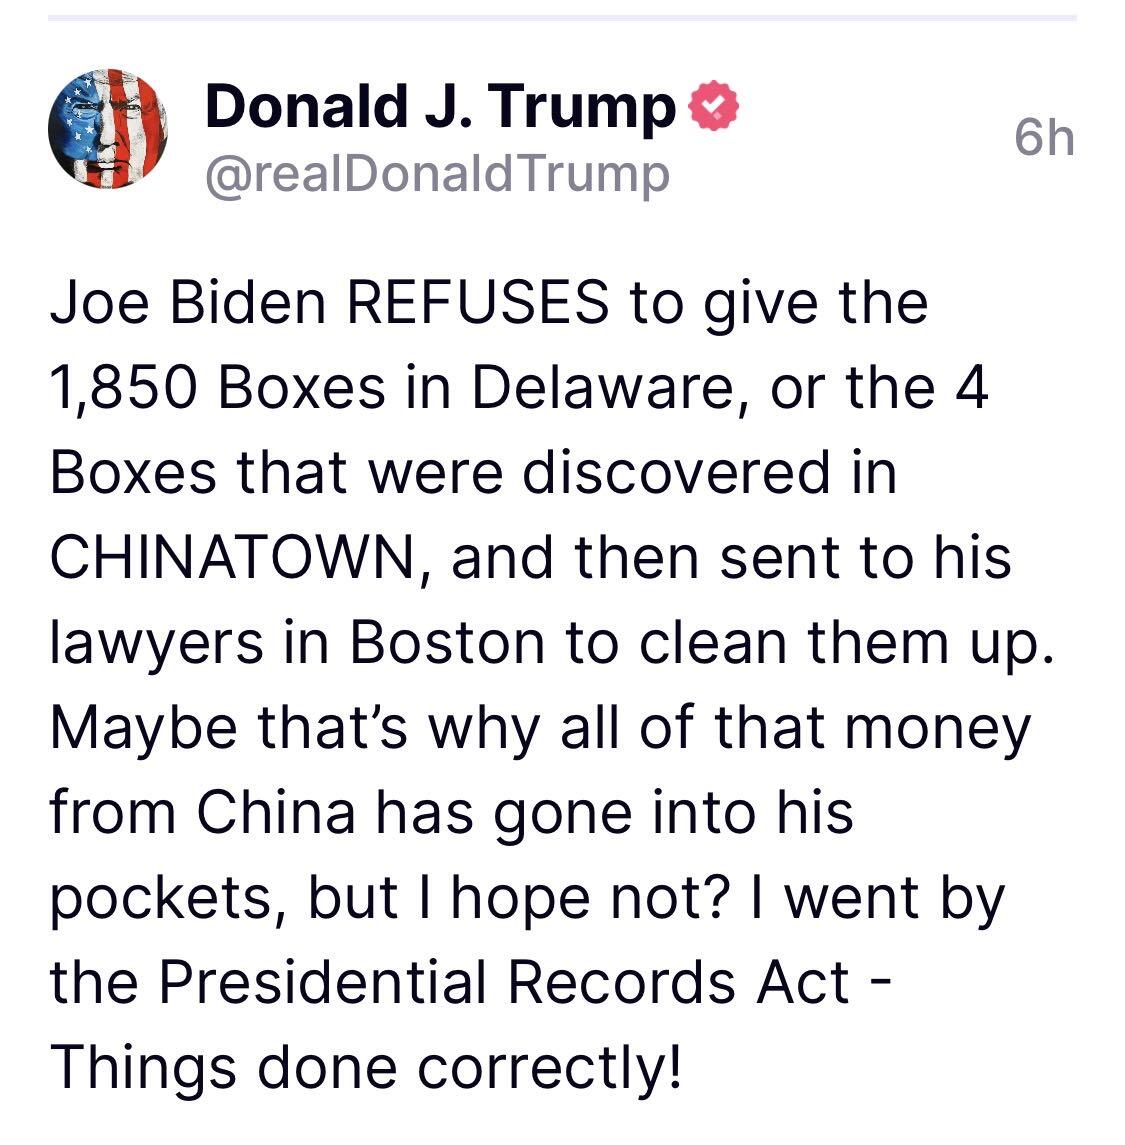 Joe Biden REFUSES to give the 1,850 Boxes in Delaware, or the 4 Boxes that were discovered in CHINATOWN, and then sent to his lawyers in Boston to clean them up. Maybe that’s why all of that money from China has gone into his pockets, but I hope not...